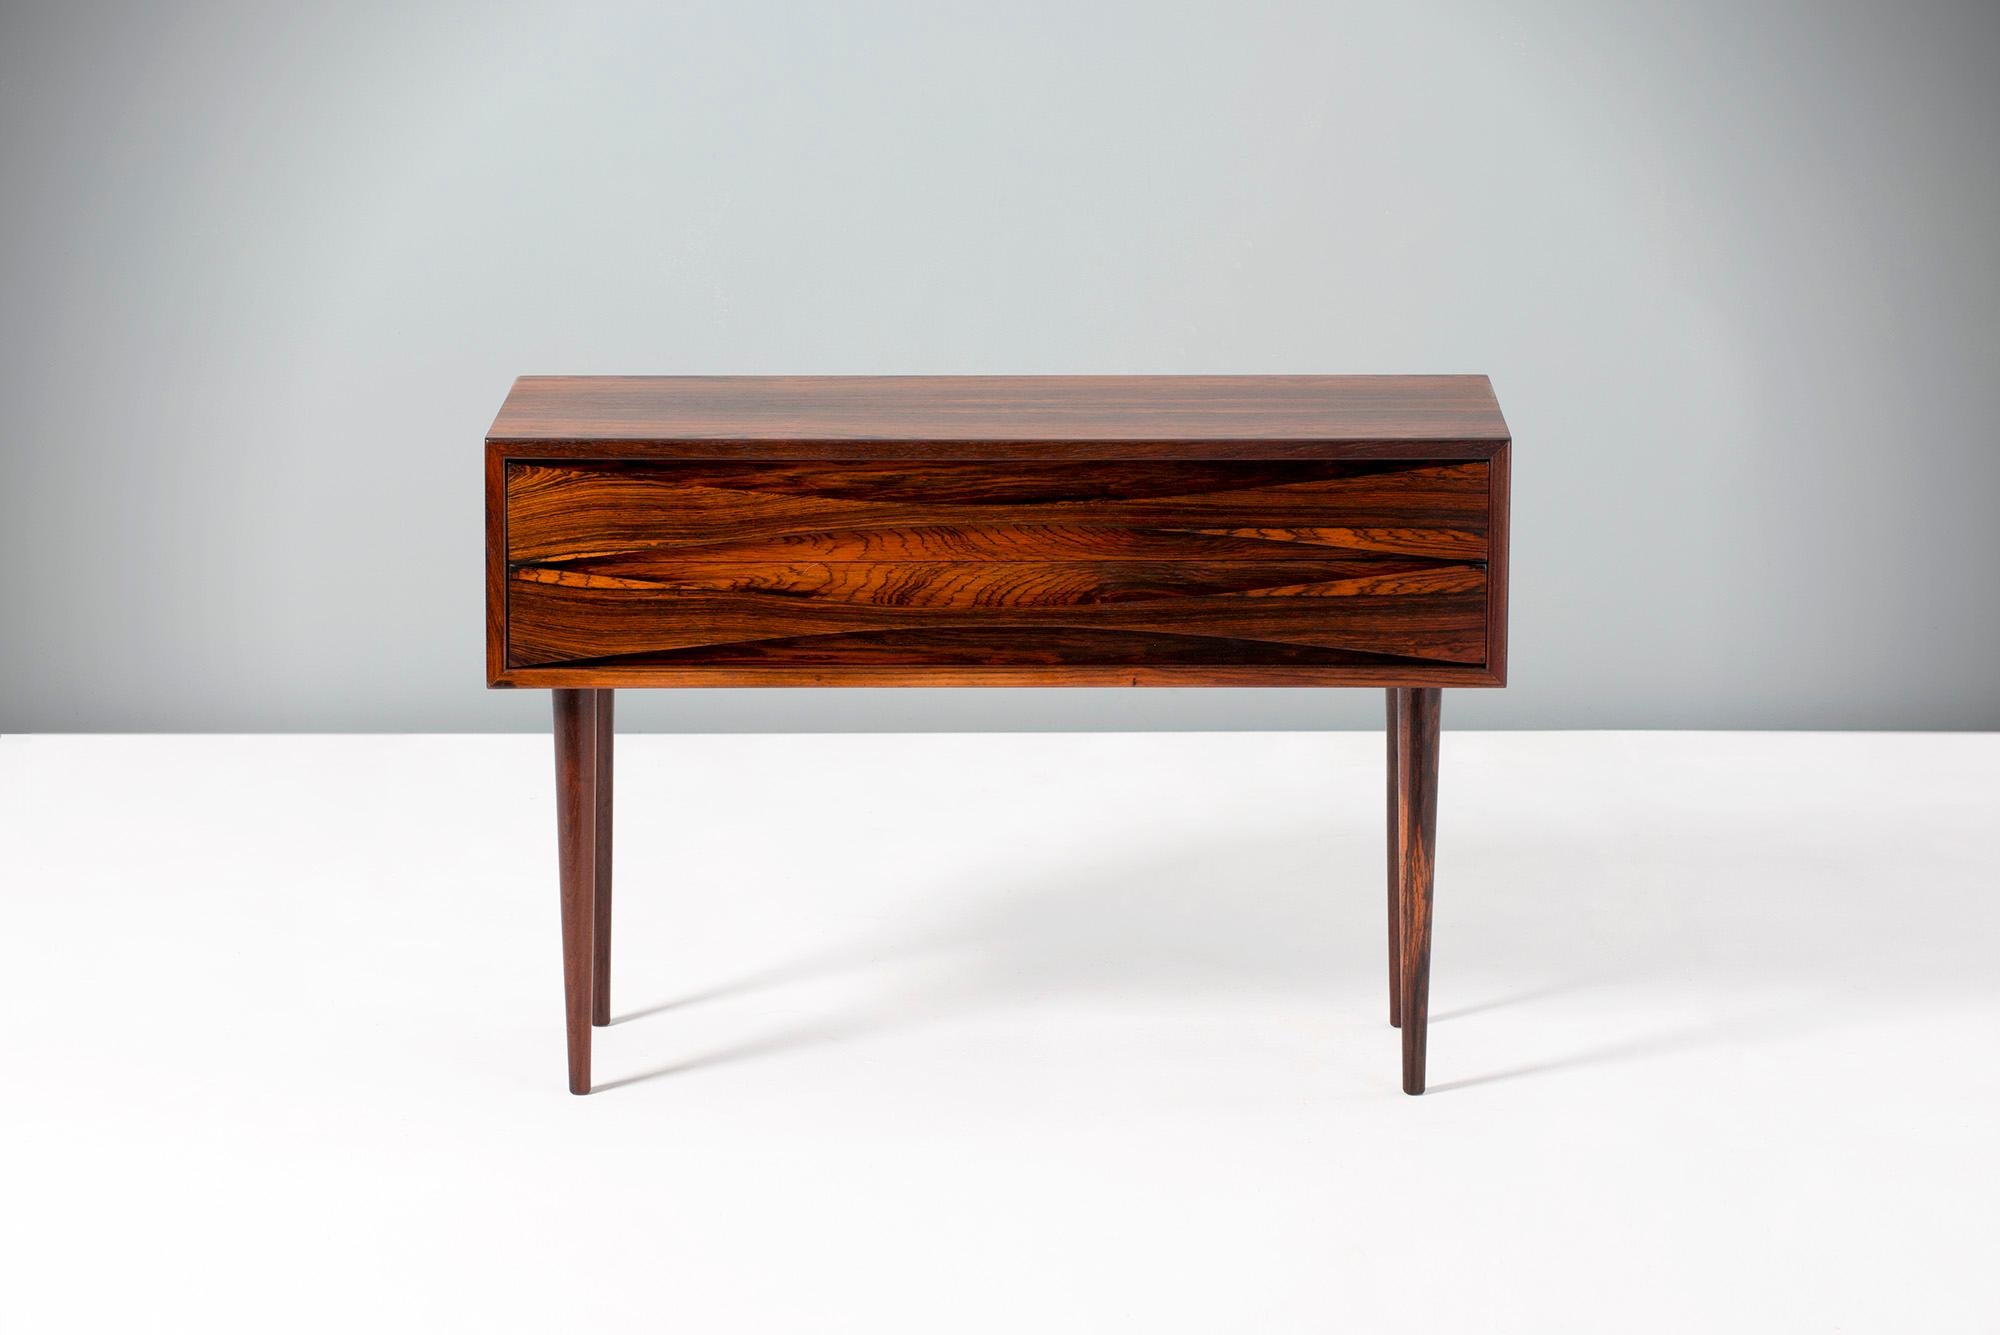 Niels Clausen

Rosewood bedside cabinet, circa 1960

Rosewood cabinet by Niels Clausen for NC Mobler, Odense, Denmark. Produced, circa 1960. Two drawers with scalloped pulls and solid tapered legs.
   